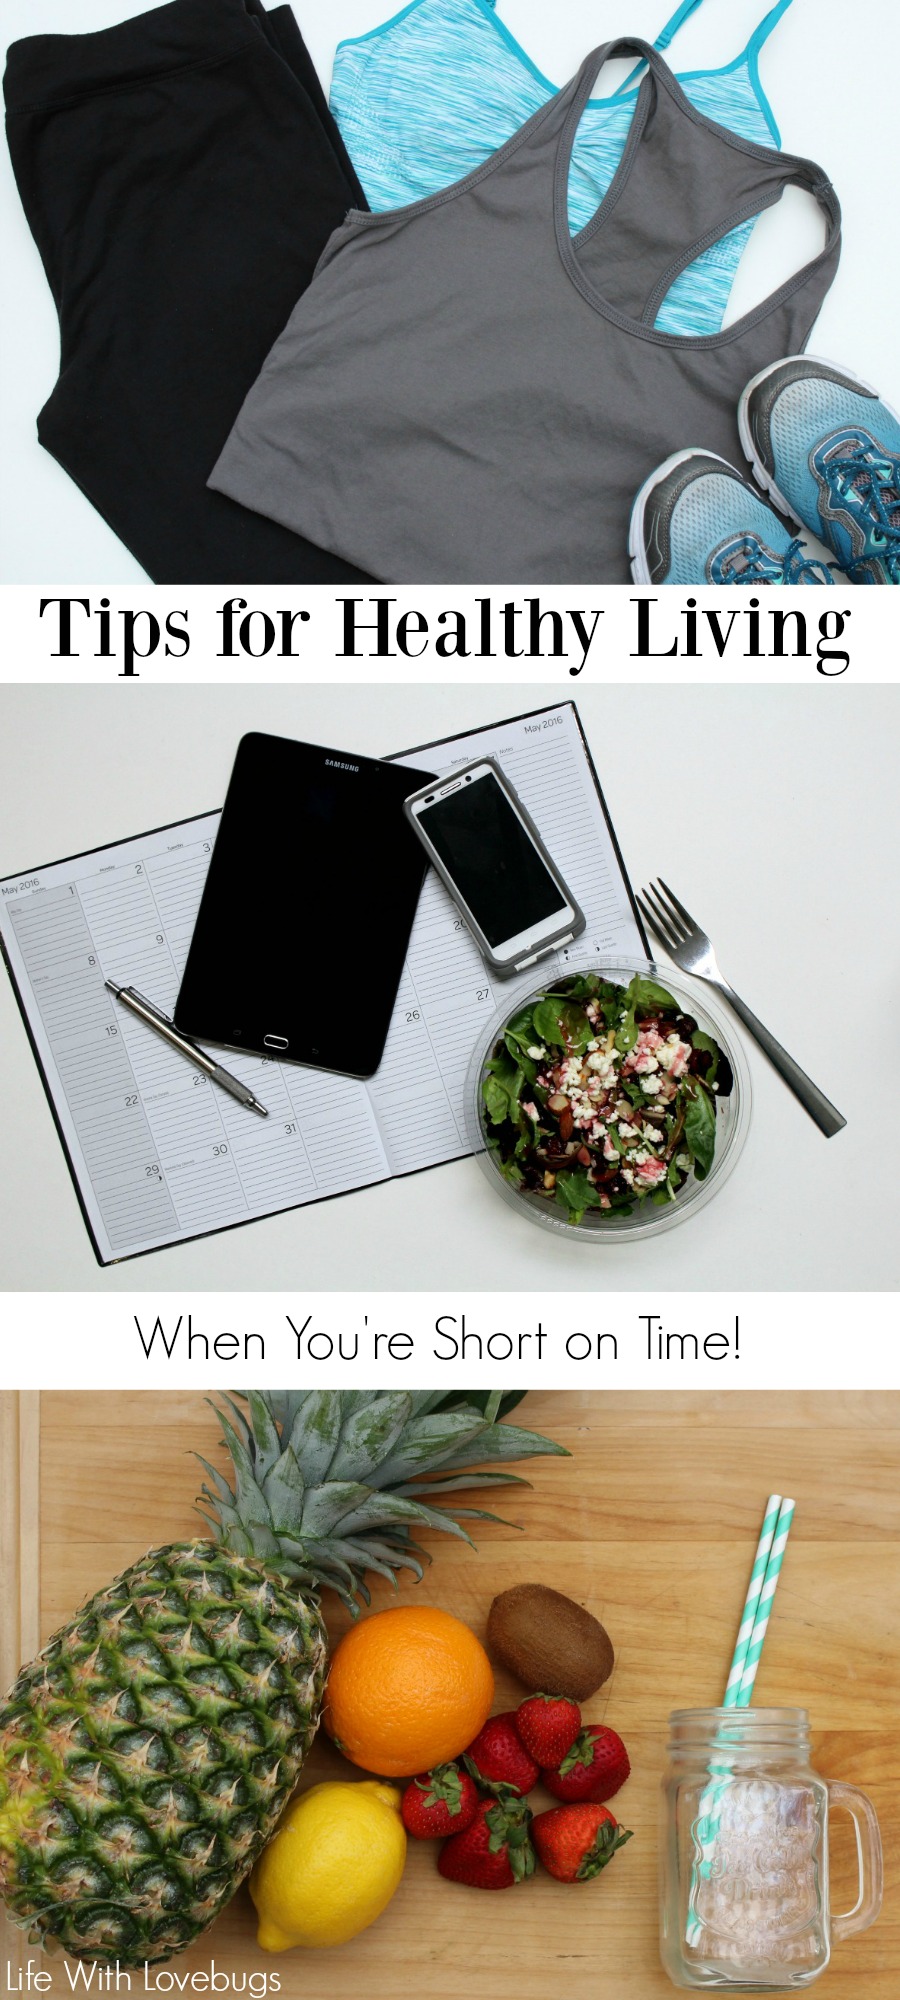 Tips for Healthy Living (When You're Short on Time!)